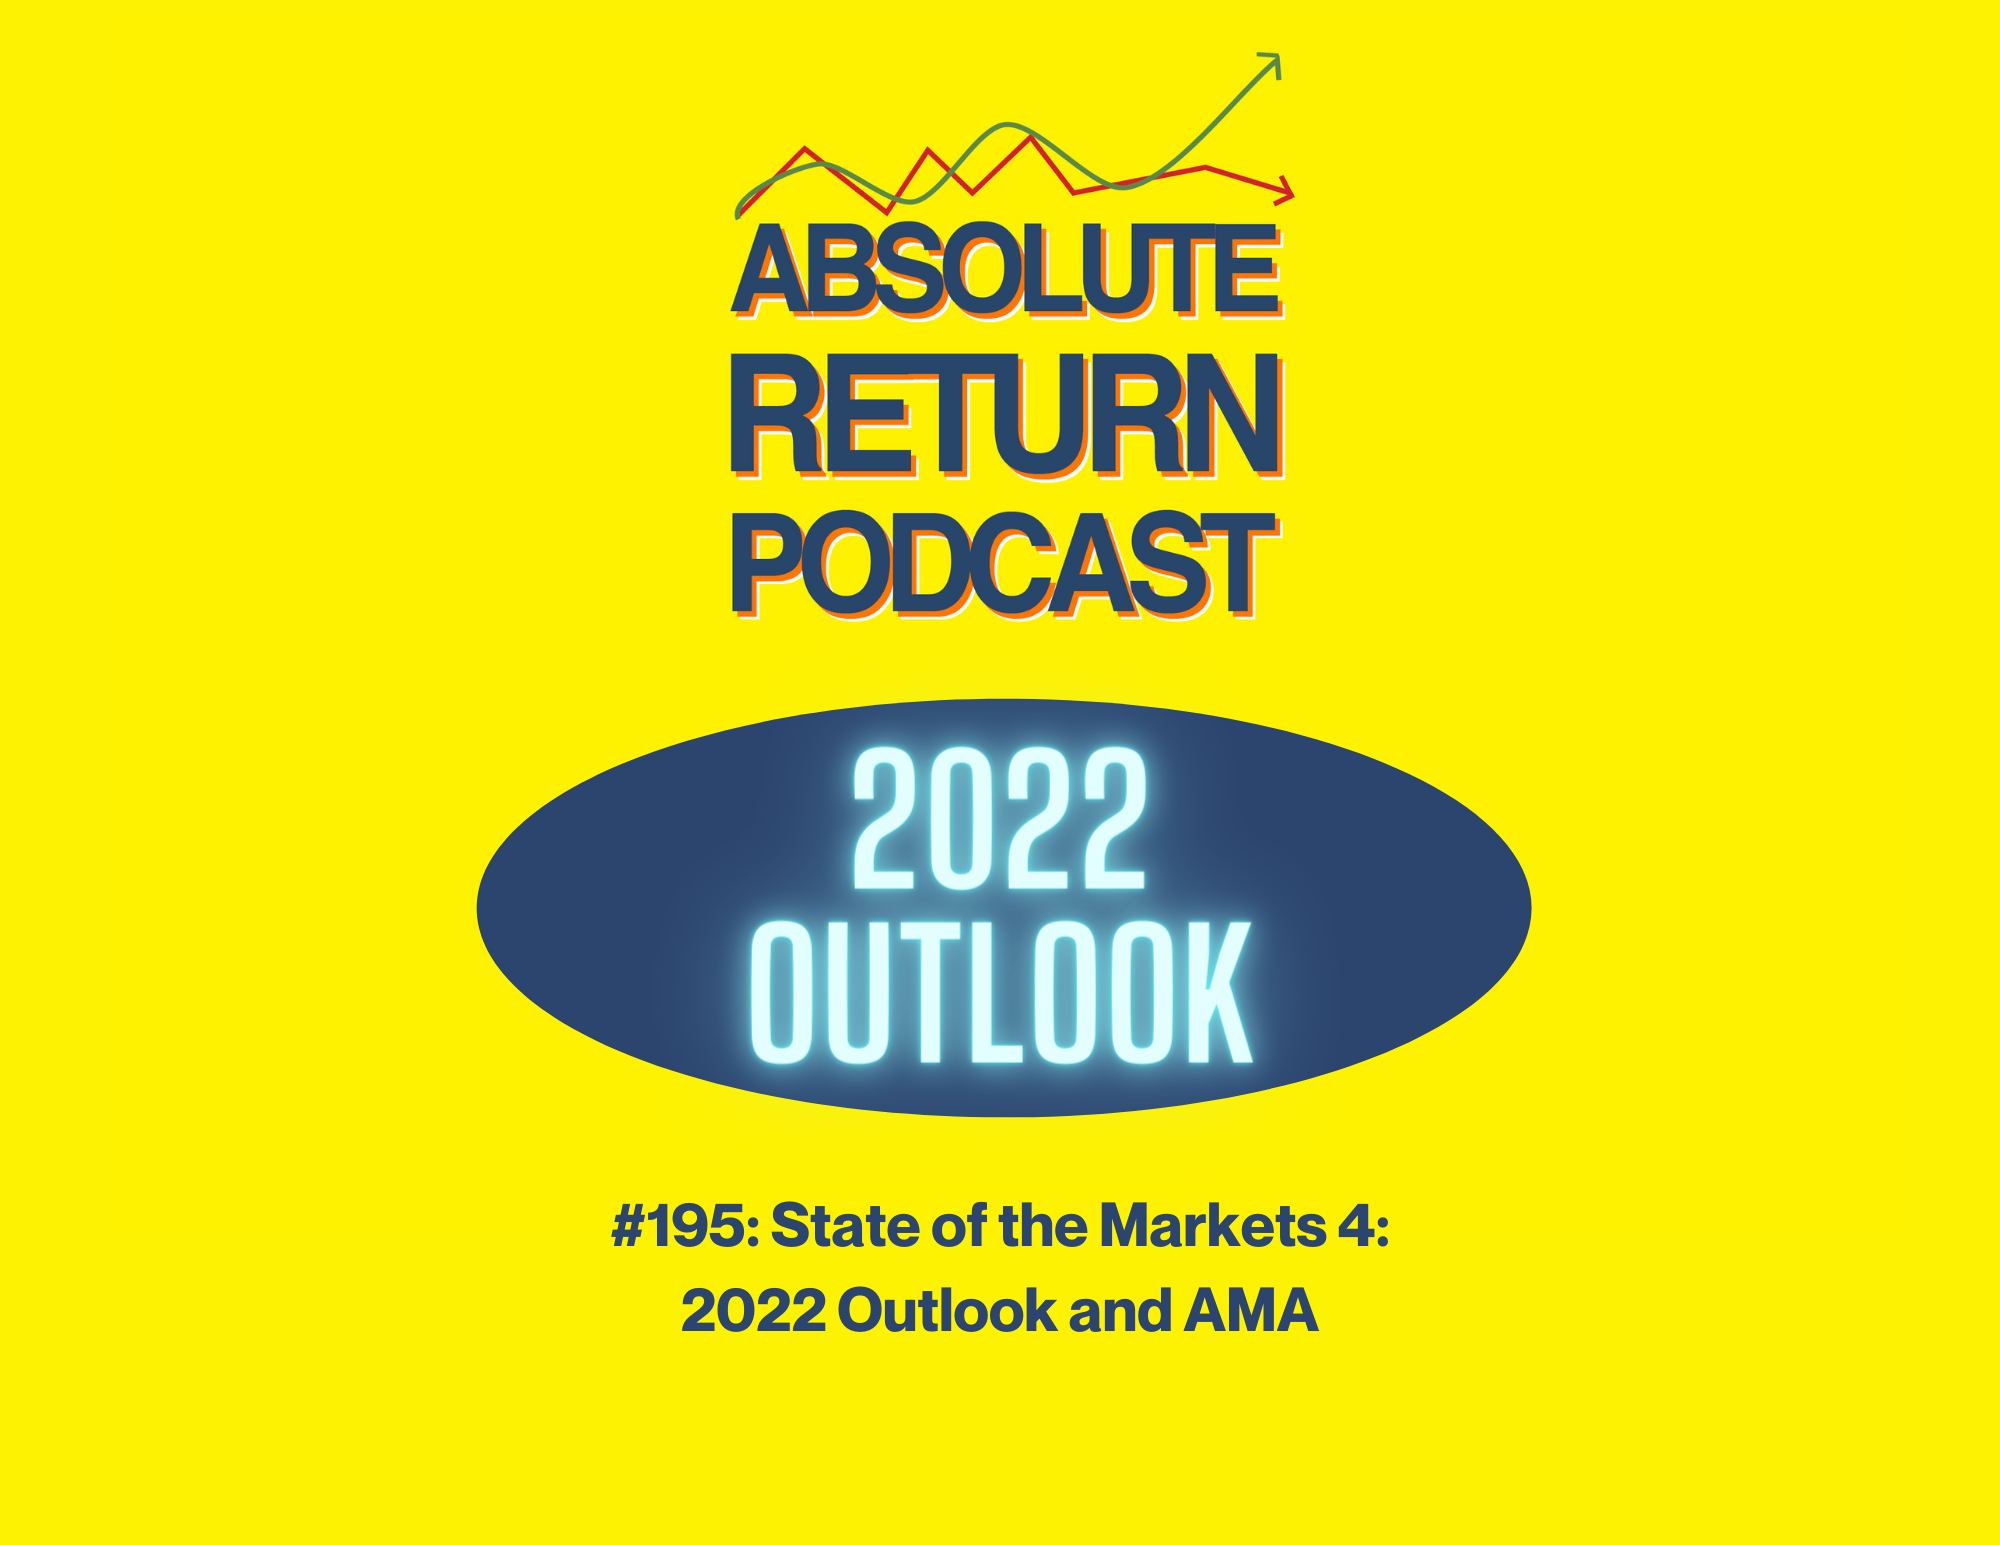 Absolute Return Podcast #195: State of the Markets 4: 2022 Outlook and AMA